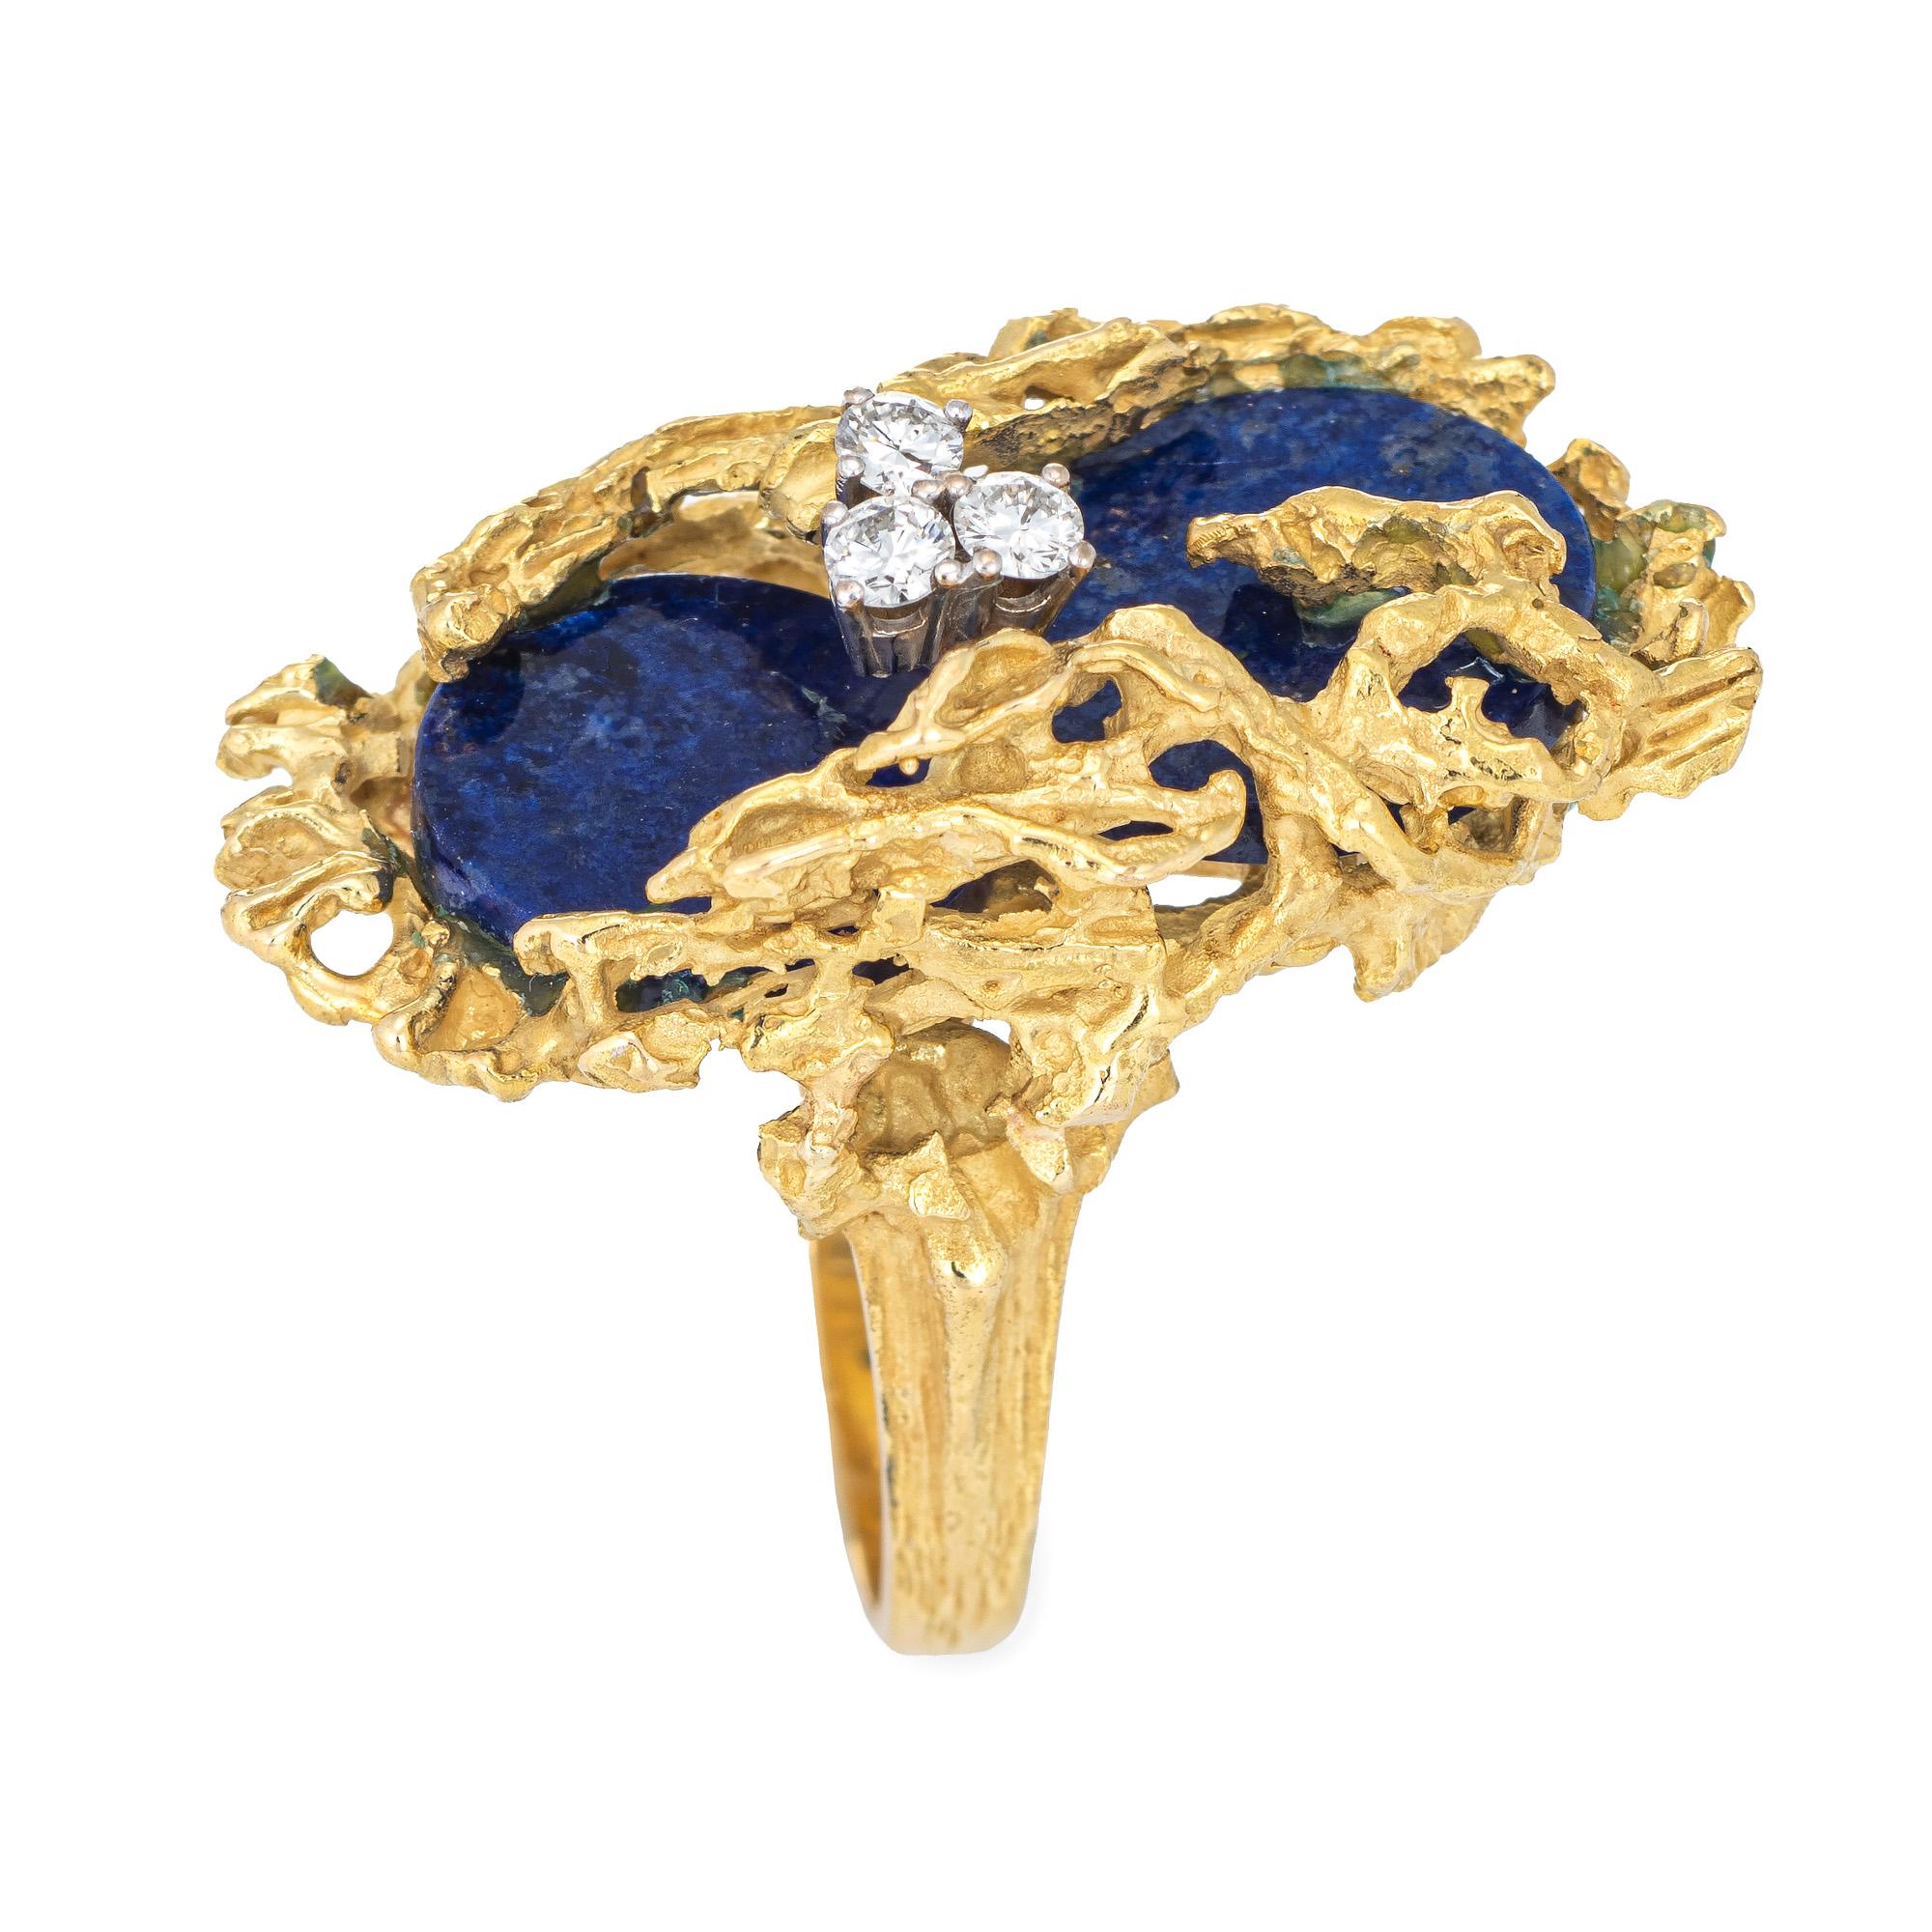 Stylish vintage Grosse Germany lapis lazuli & diamond cocktail ring (circa 1972) crafted in 18 karat yellow gold. 

Two round cut pieces of lapis lazuli measures 13mm each, accented with three estimated 0.05 carat diamonds. The total diamond weight